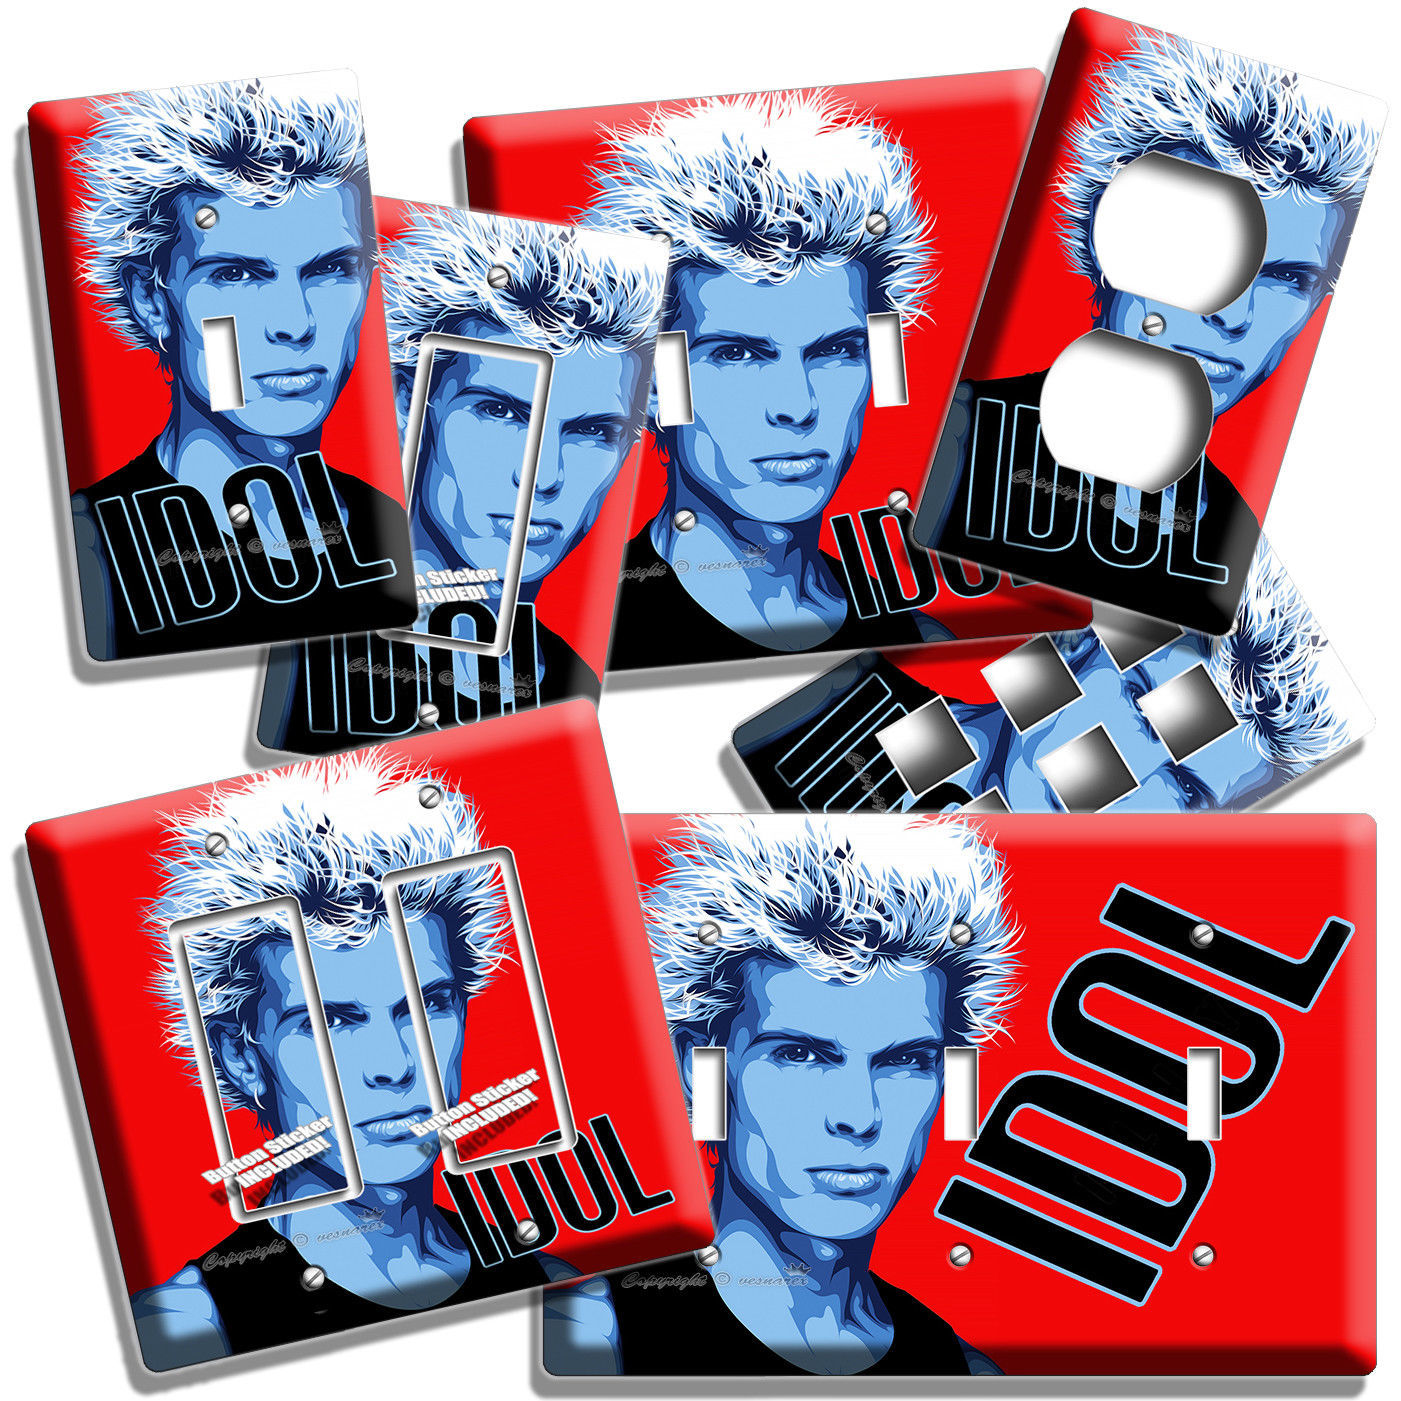 BILLY IDOL GLAM PUNK ROCK SUPER STAR LIGHT SWITCH WALL PLATES OUTLET ROOM DECOR